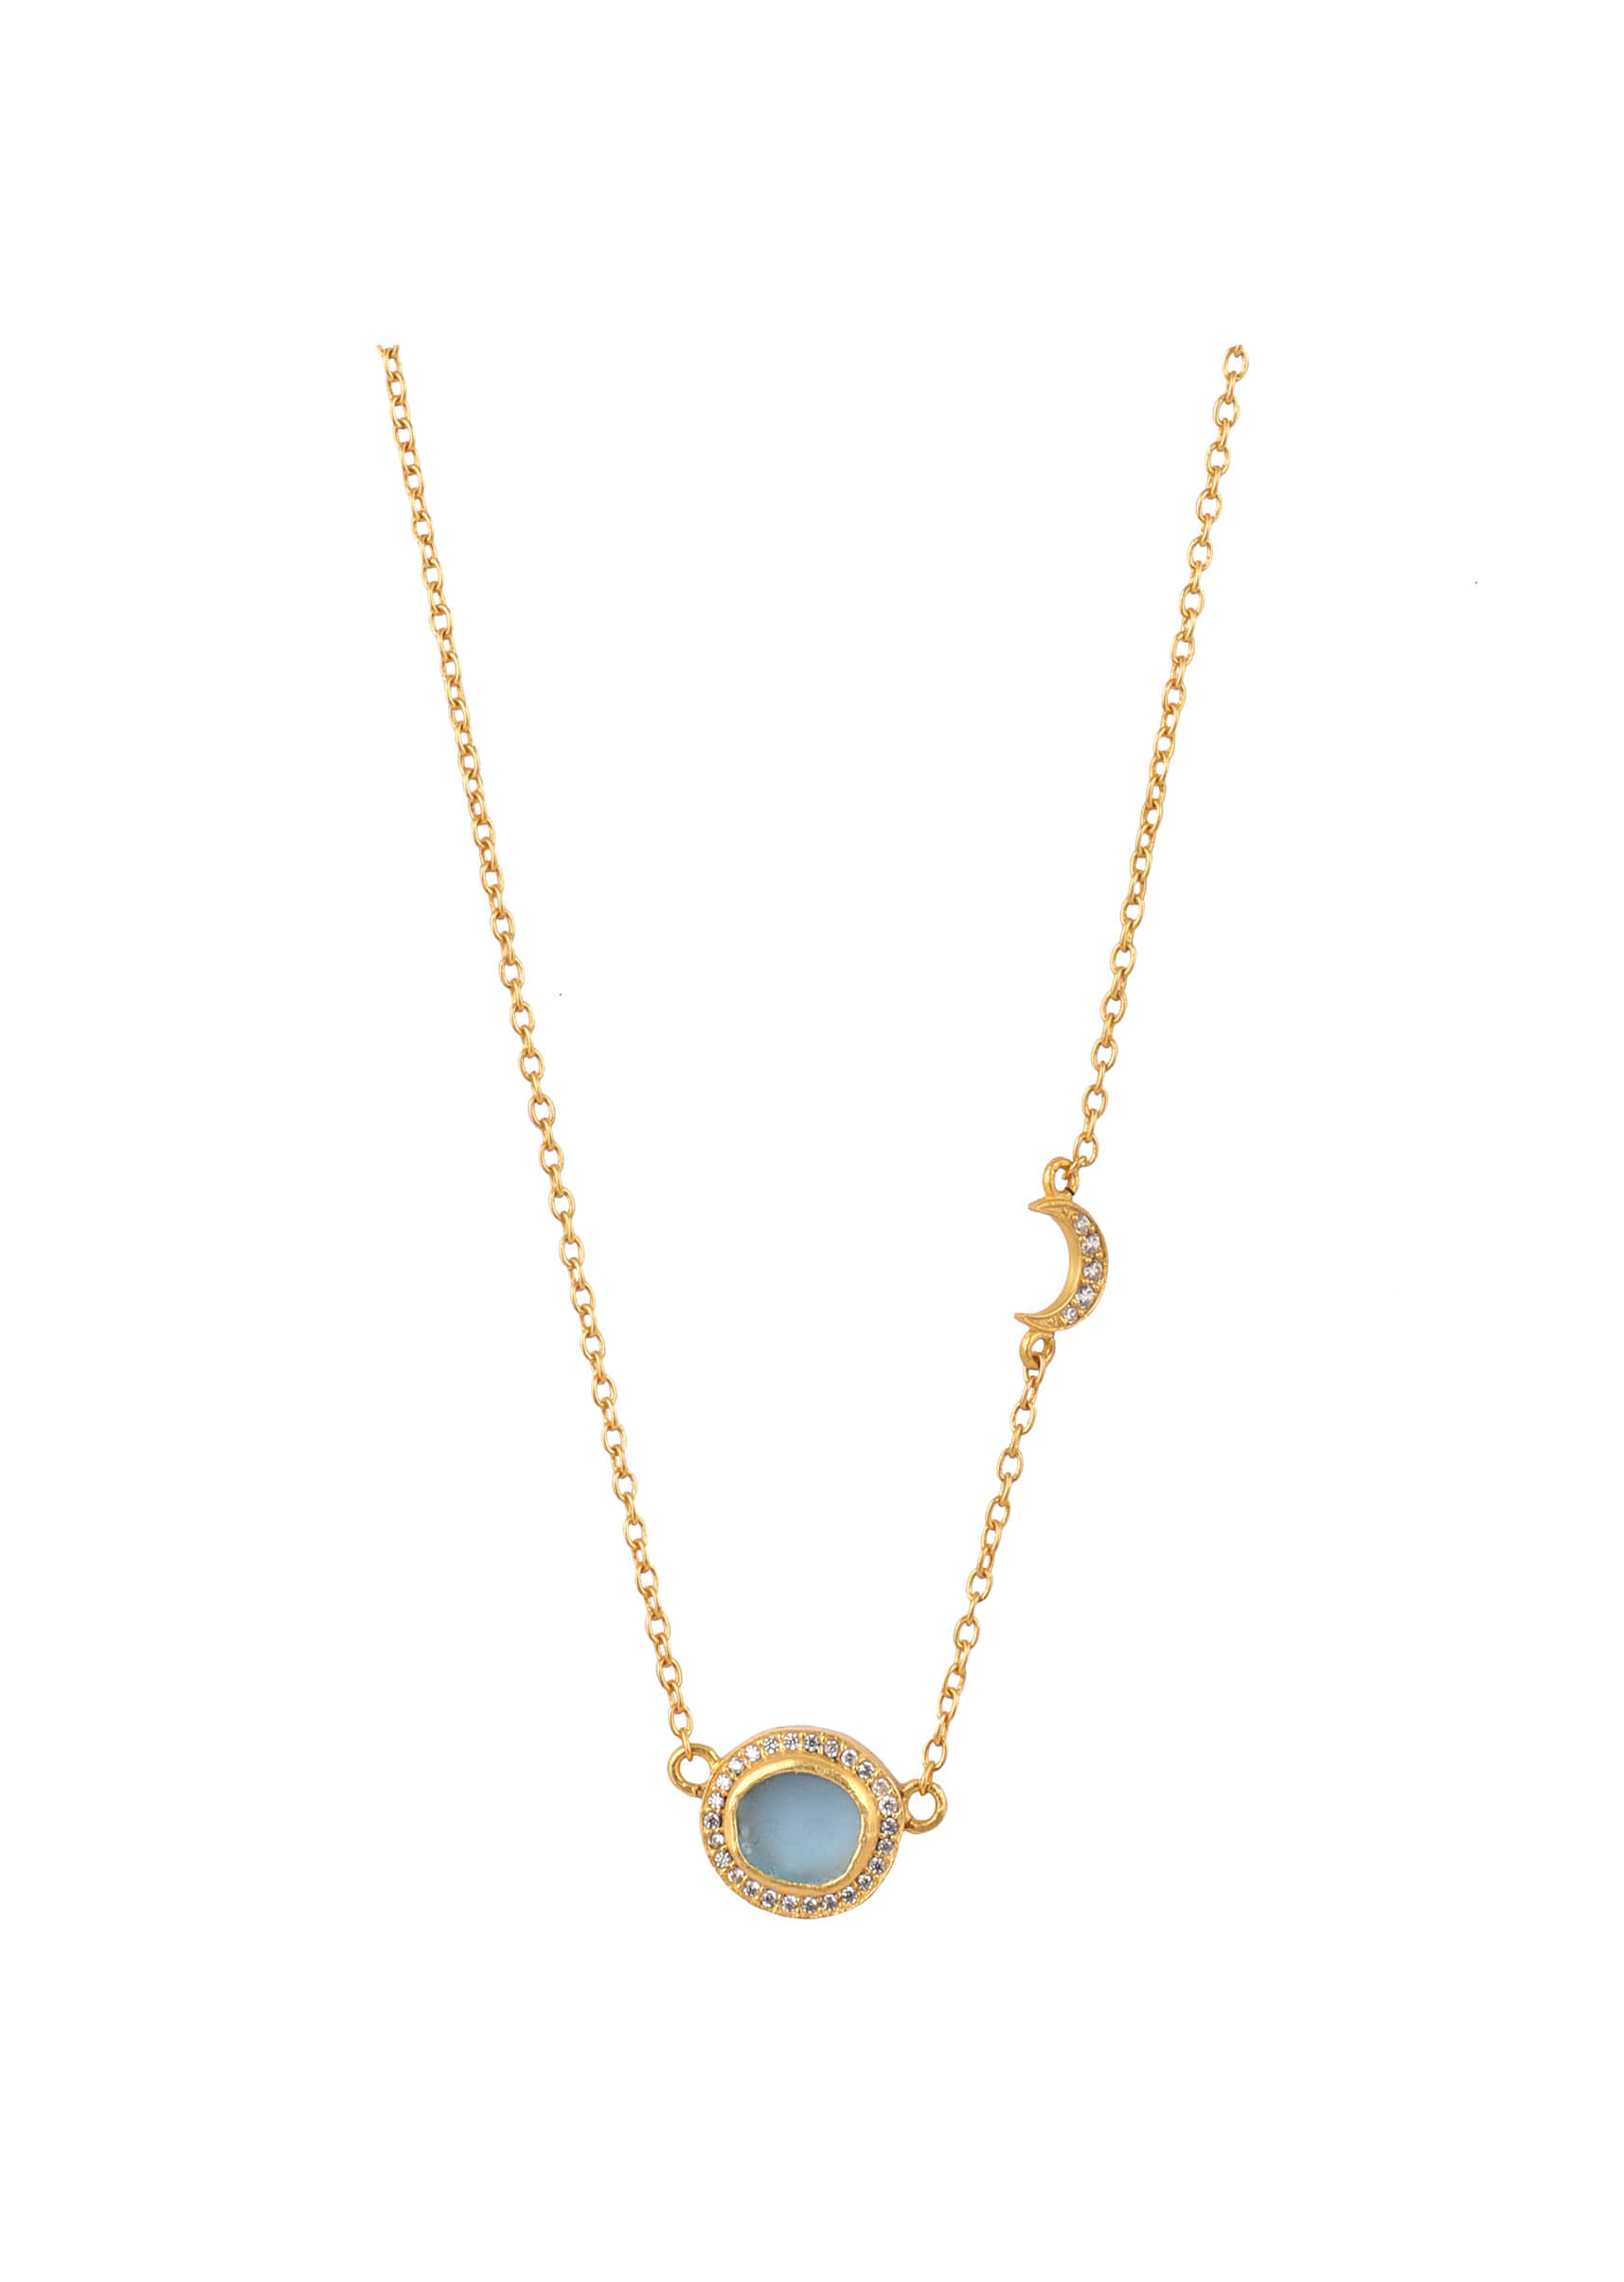 Gold Plated Necklace With Blue Topaz Pendant And Studded With Cubic Zircons By Zariin